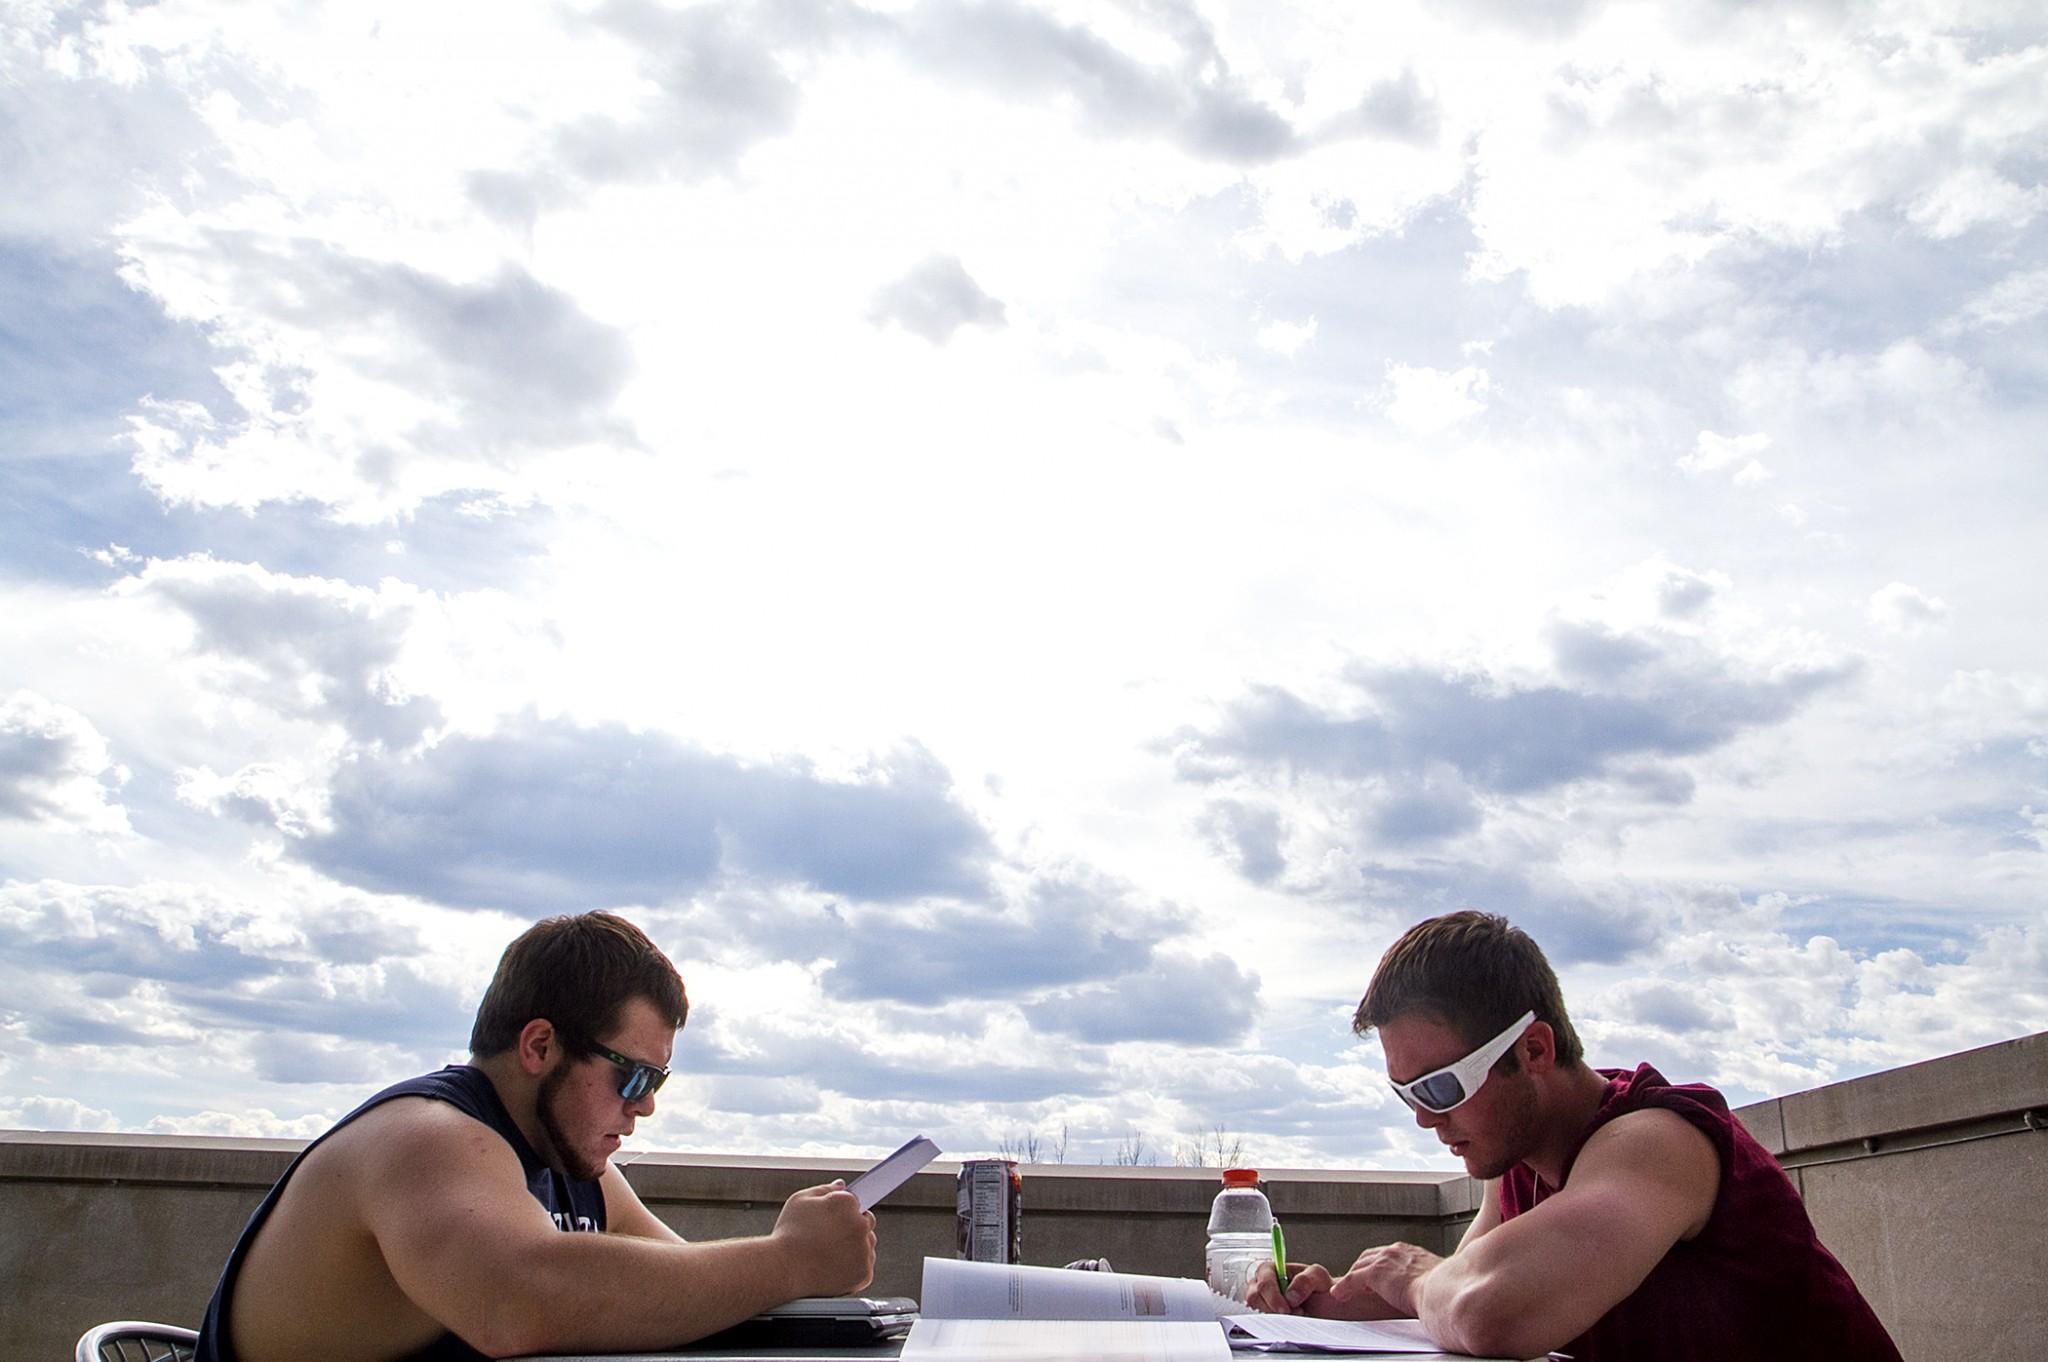 Sophomores Rusty Andres (left) and Hondo Anderson (right) study for finals atop the Behavioral Sciences Building on Sunday afternoon. With finals week ahead, students look forward to a well desserved break with Summer skies ahead.